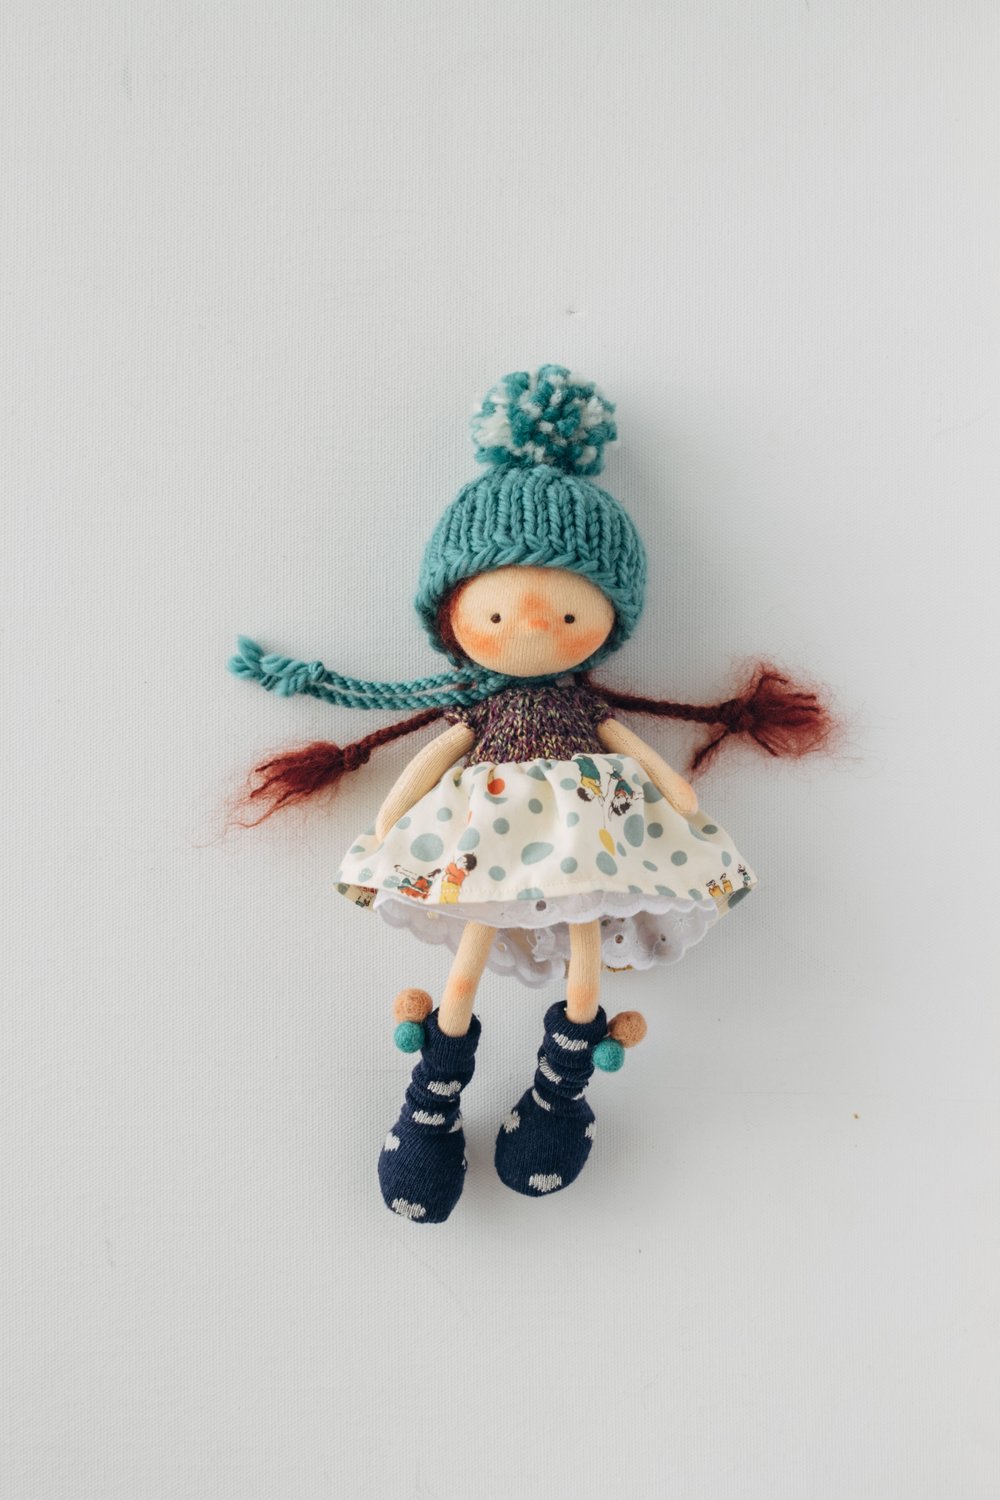 Image of Lyla - Wool filled Weighted mini waldorf inspired girl doll